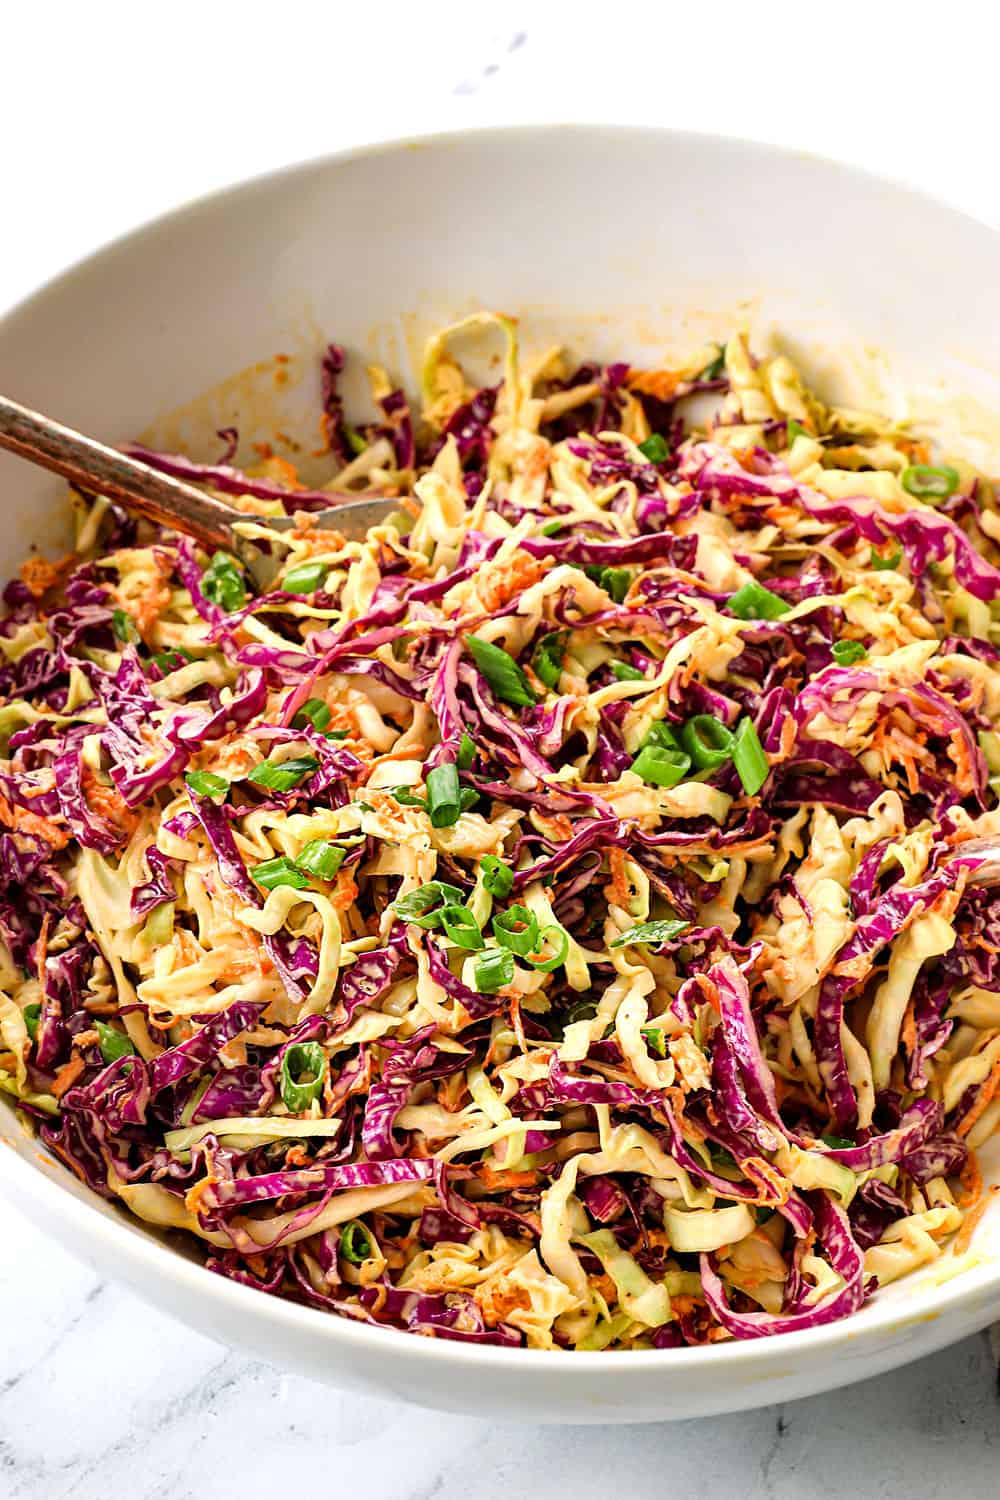 traditional coleslaw recipe with cabbage, carrots, green onions and coleslaw dressing